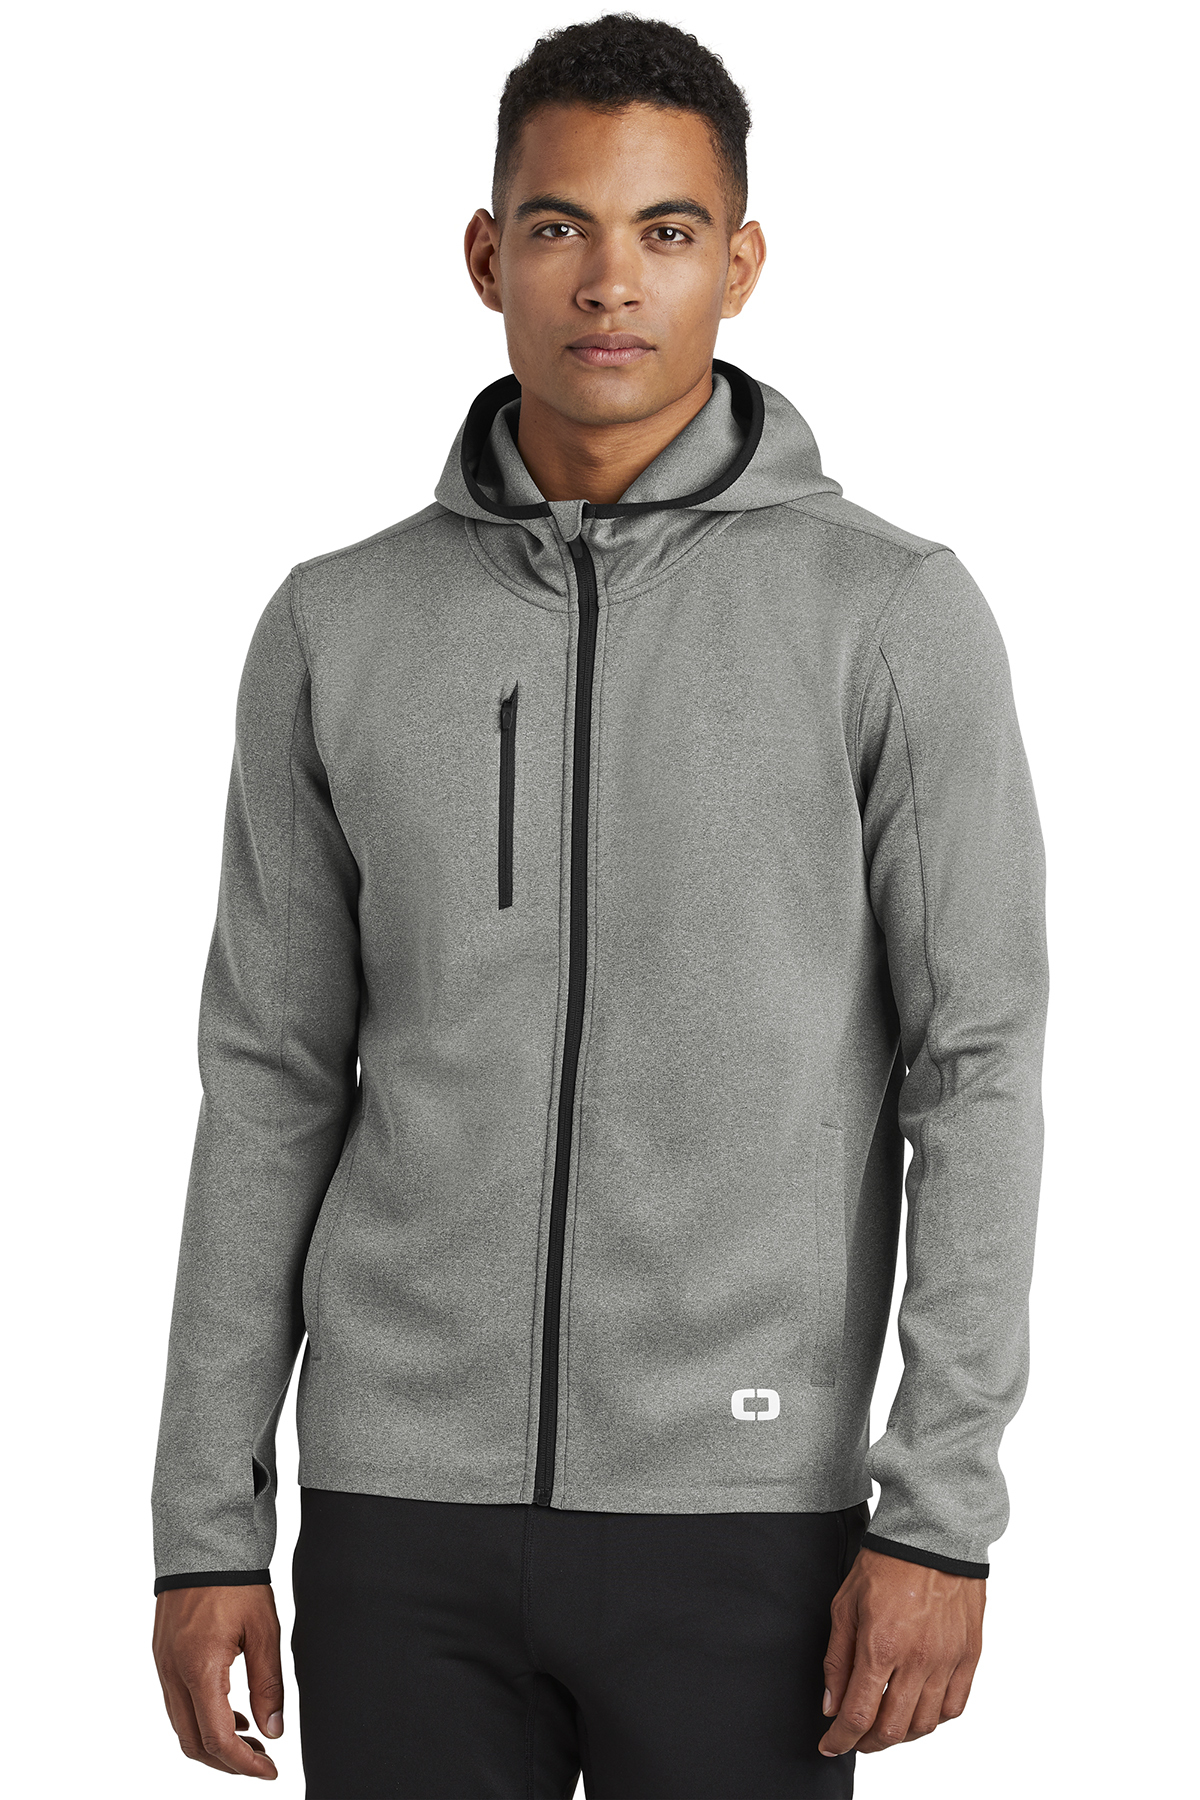 OGIO ® ENDURANCE Stealth Full-Zip Jacket | Outerwear | Company Casuals